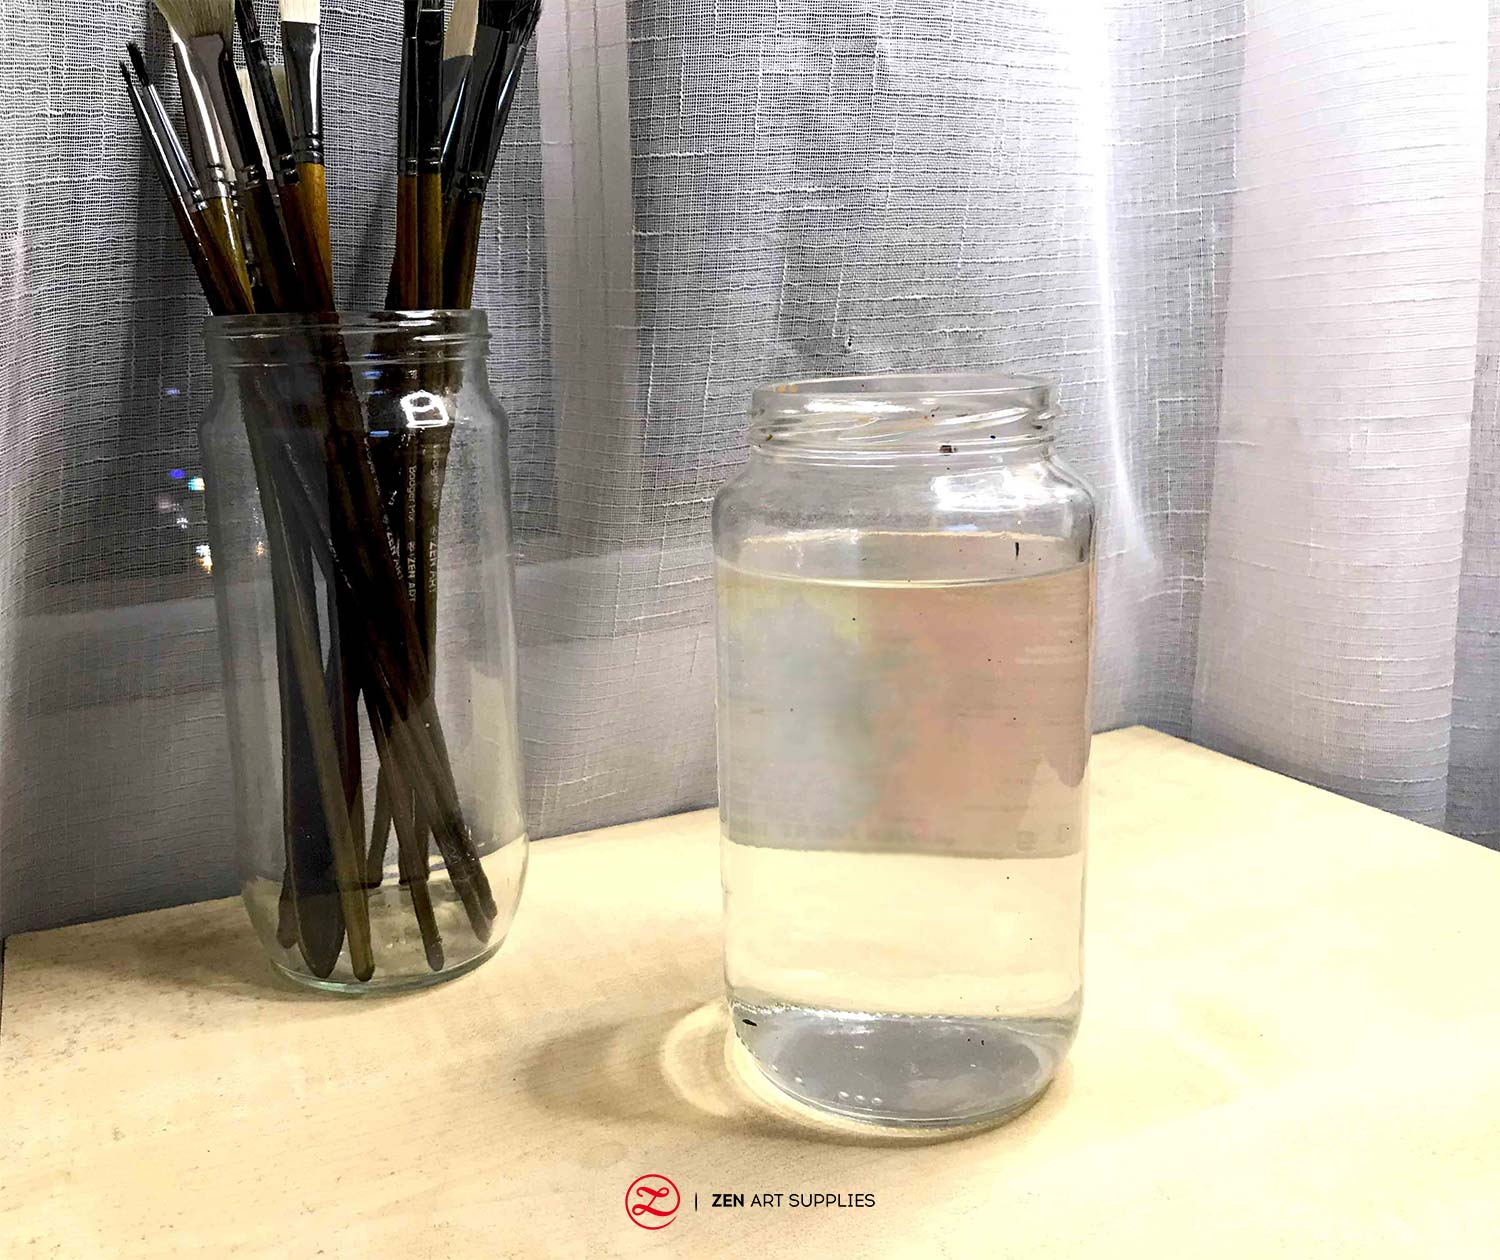 A big jar with water beside a jar holding acrylic paint brushes